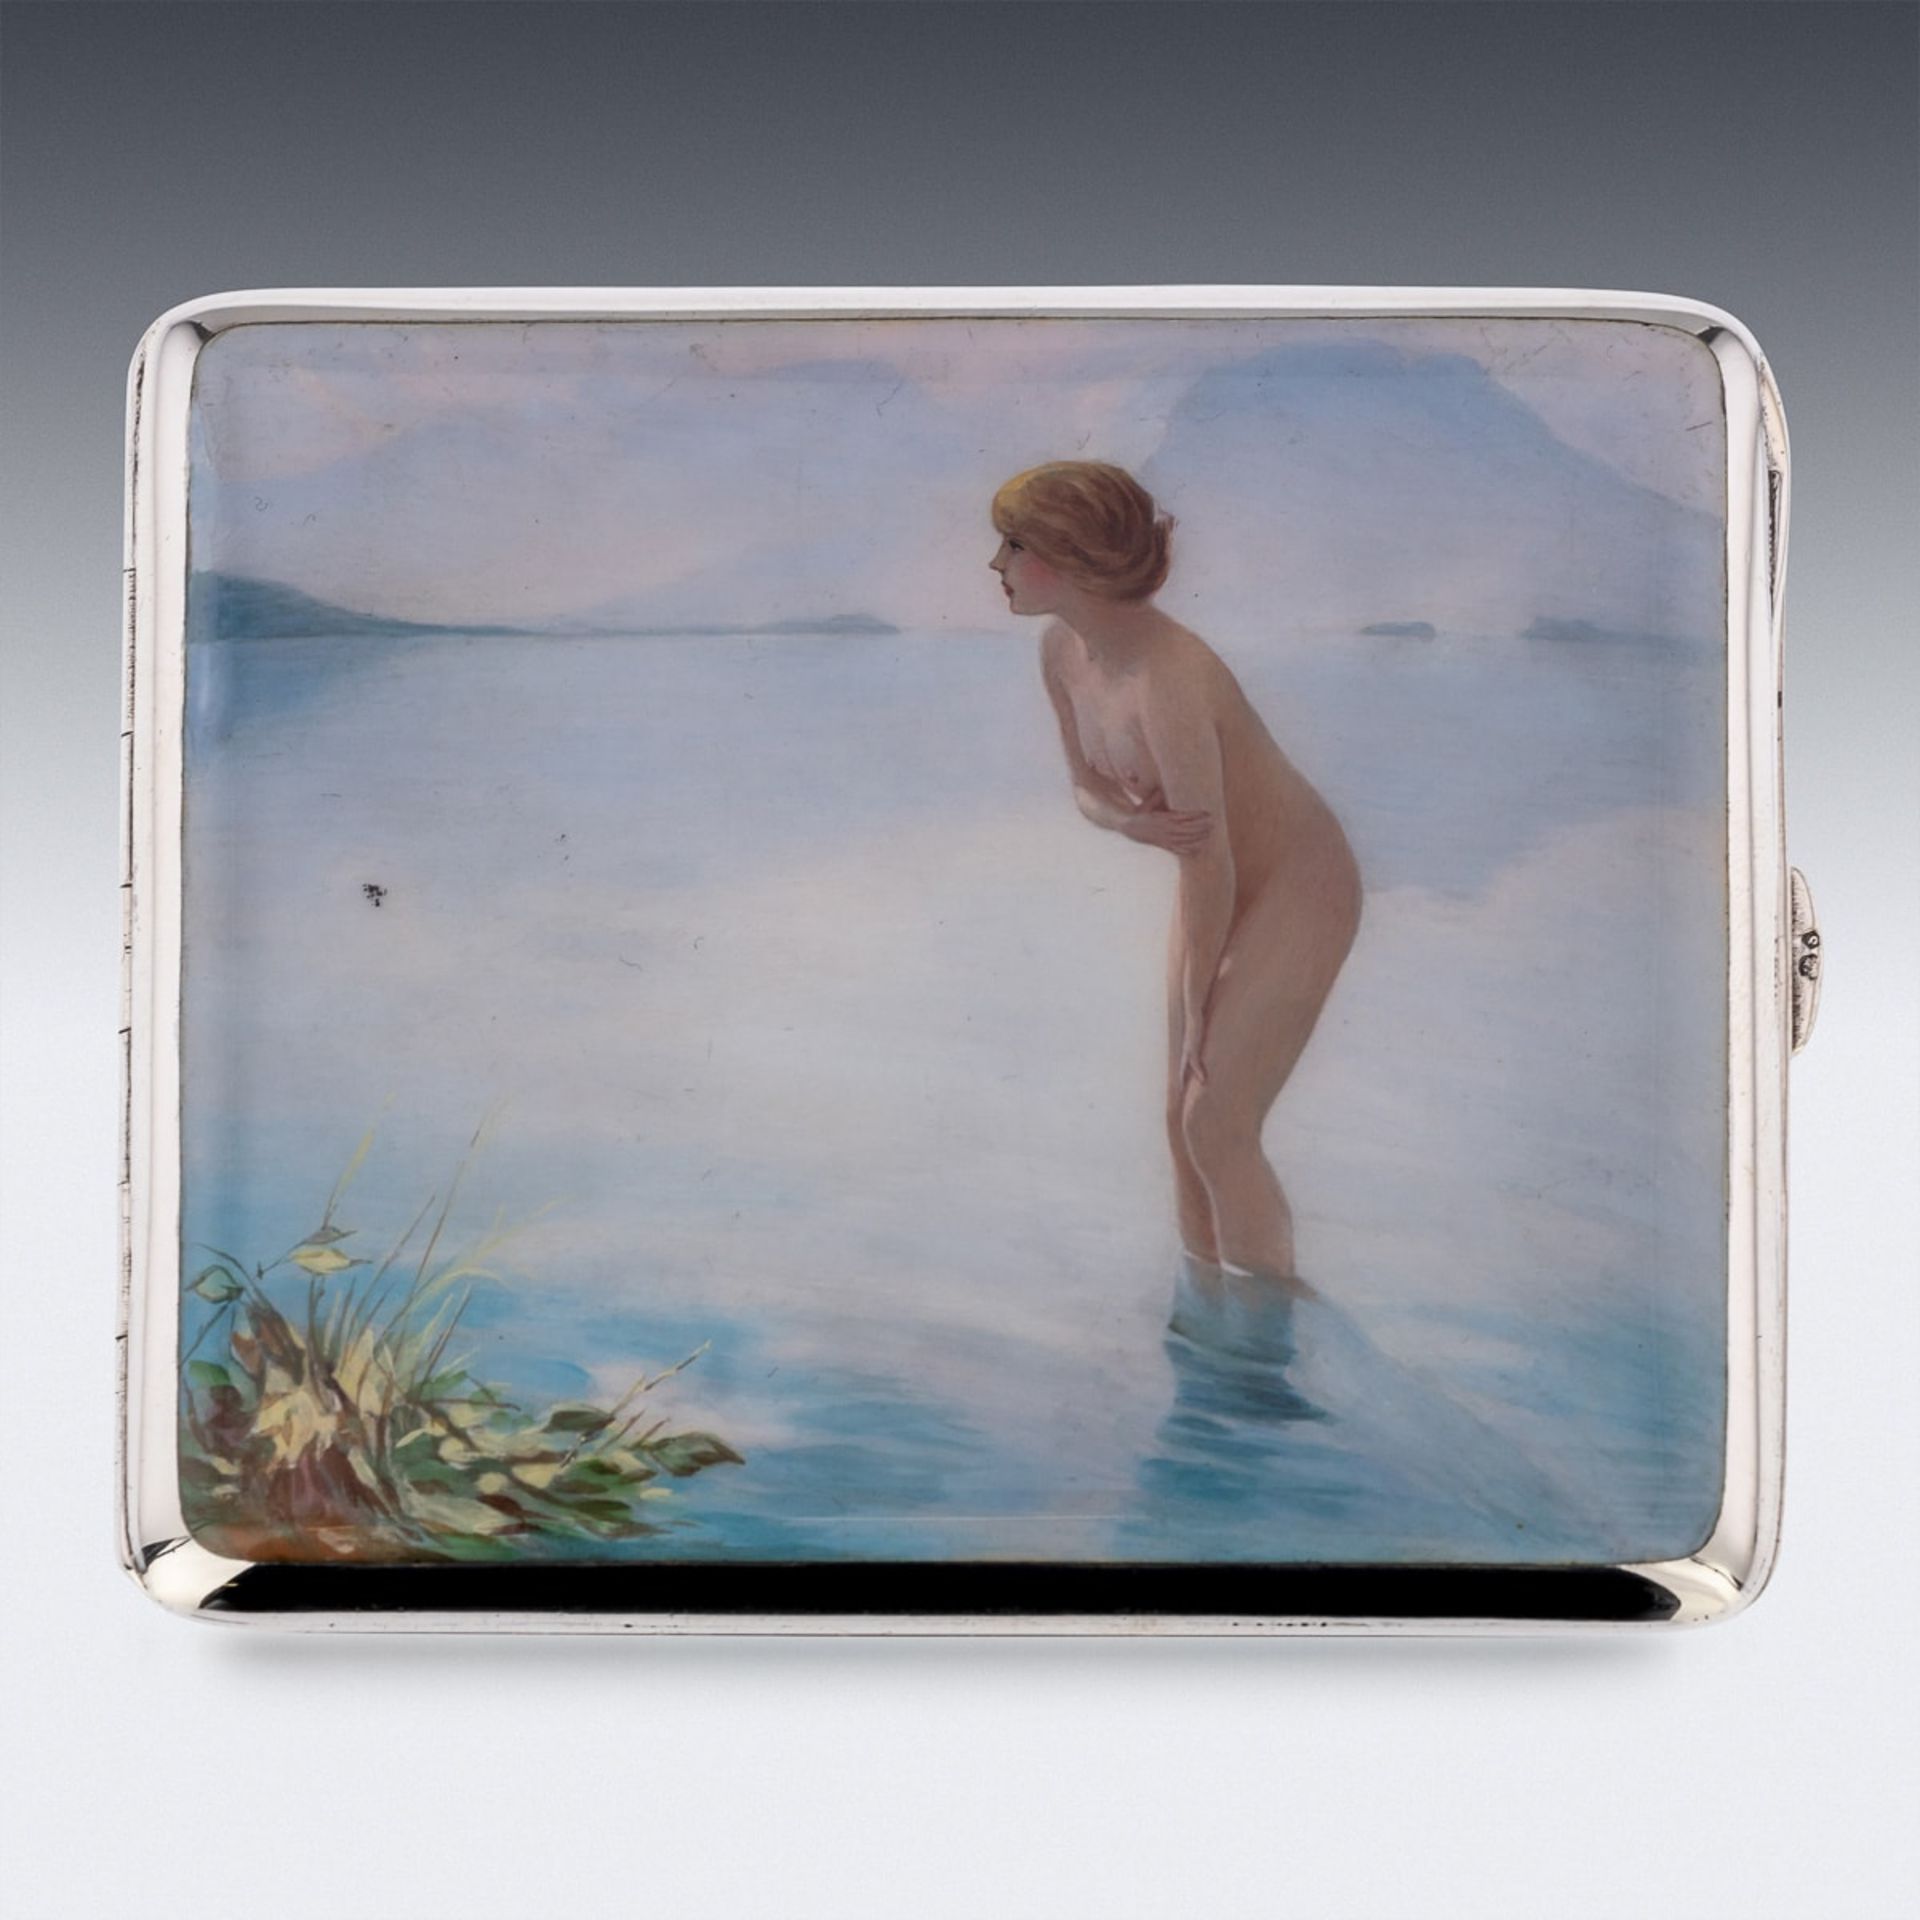 AN EARLY 20TH CENTURY EROTIC SILVER AND ENAMEL CIGARETTE CASE C. 1910 - Image 4 of 16